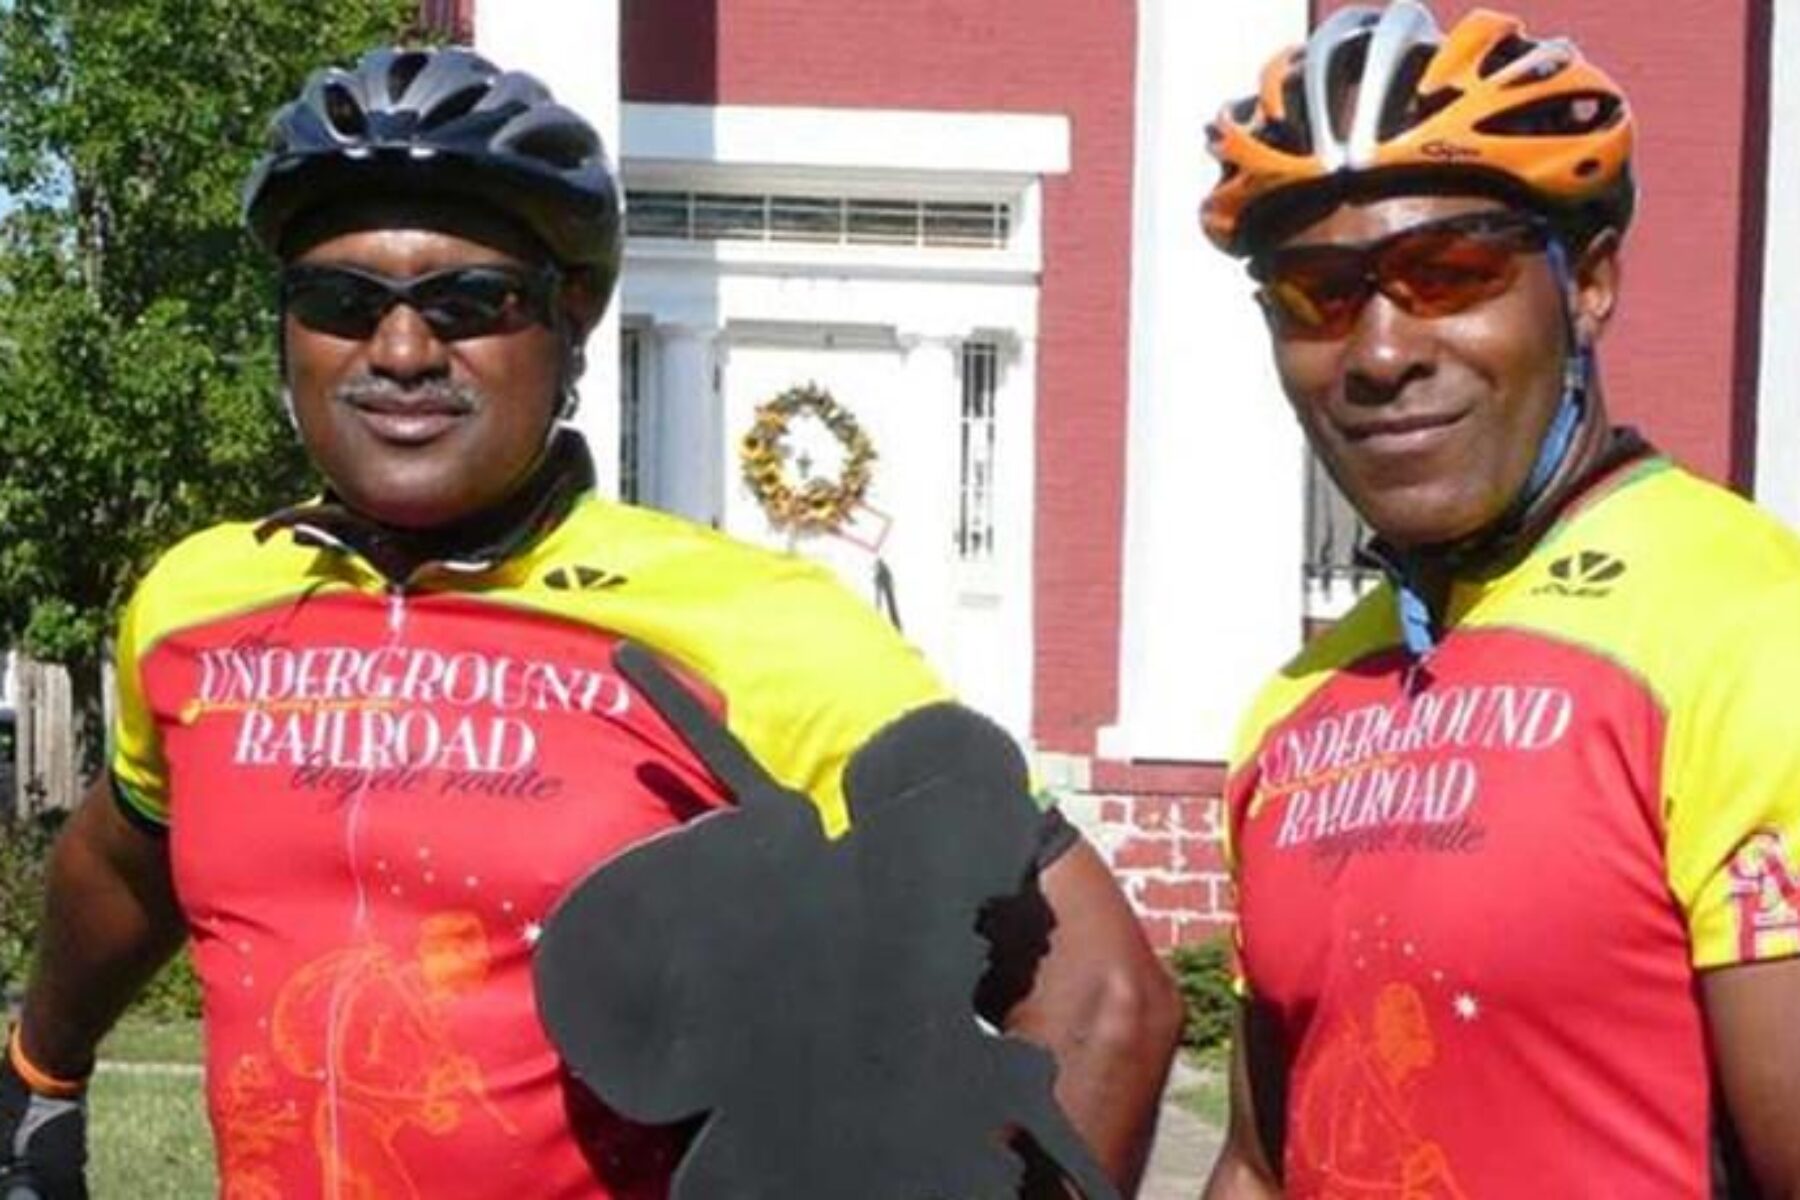 Mario Brown from the Center for Health Equity at the University of Pittsburgh and Adventure Cycling member George Thomas in front of Bertie Hall, along the Niagara River Recreation Trail in Ontario, Canada, during the 2007 inaugural tour of the Underground Railroad Bicycling Route | Photo by C. Spratling, courtesy Adventure Cycling Association